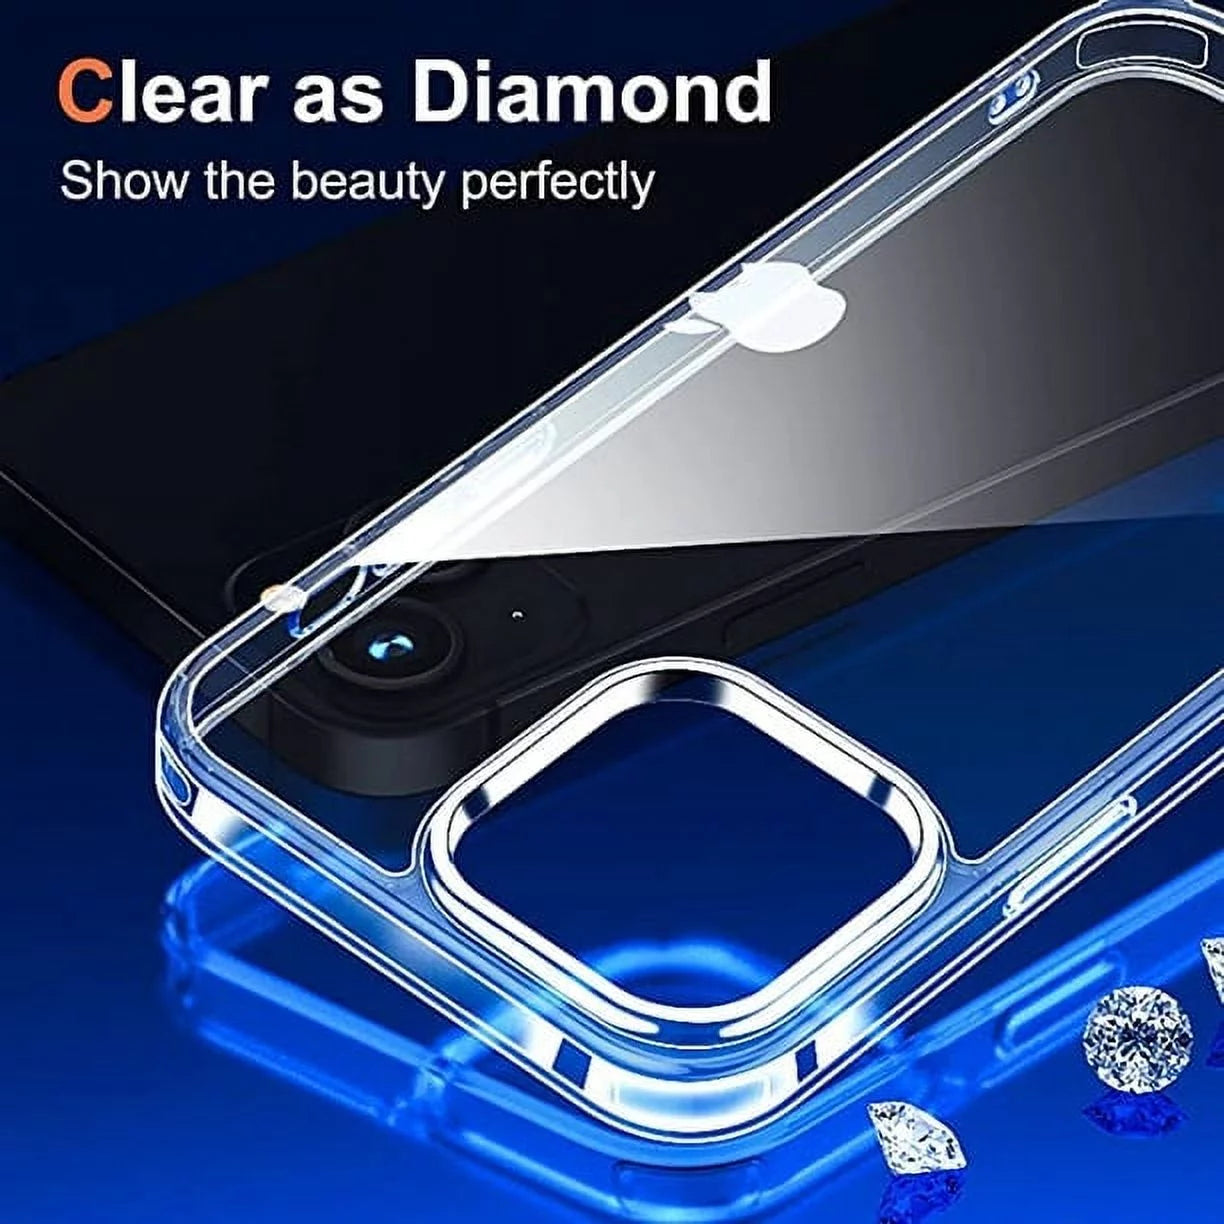 iP 13 Pro ALL Clear Cases